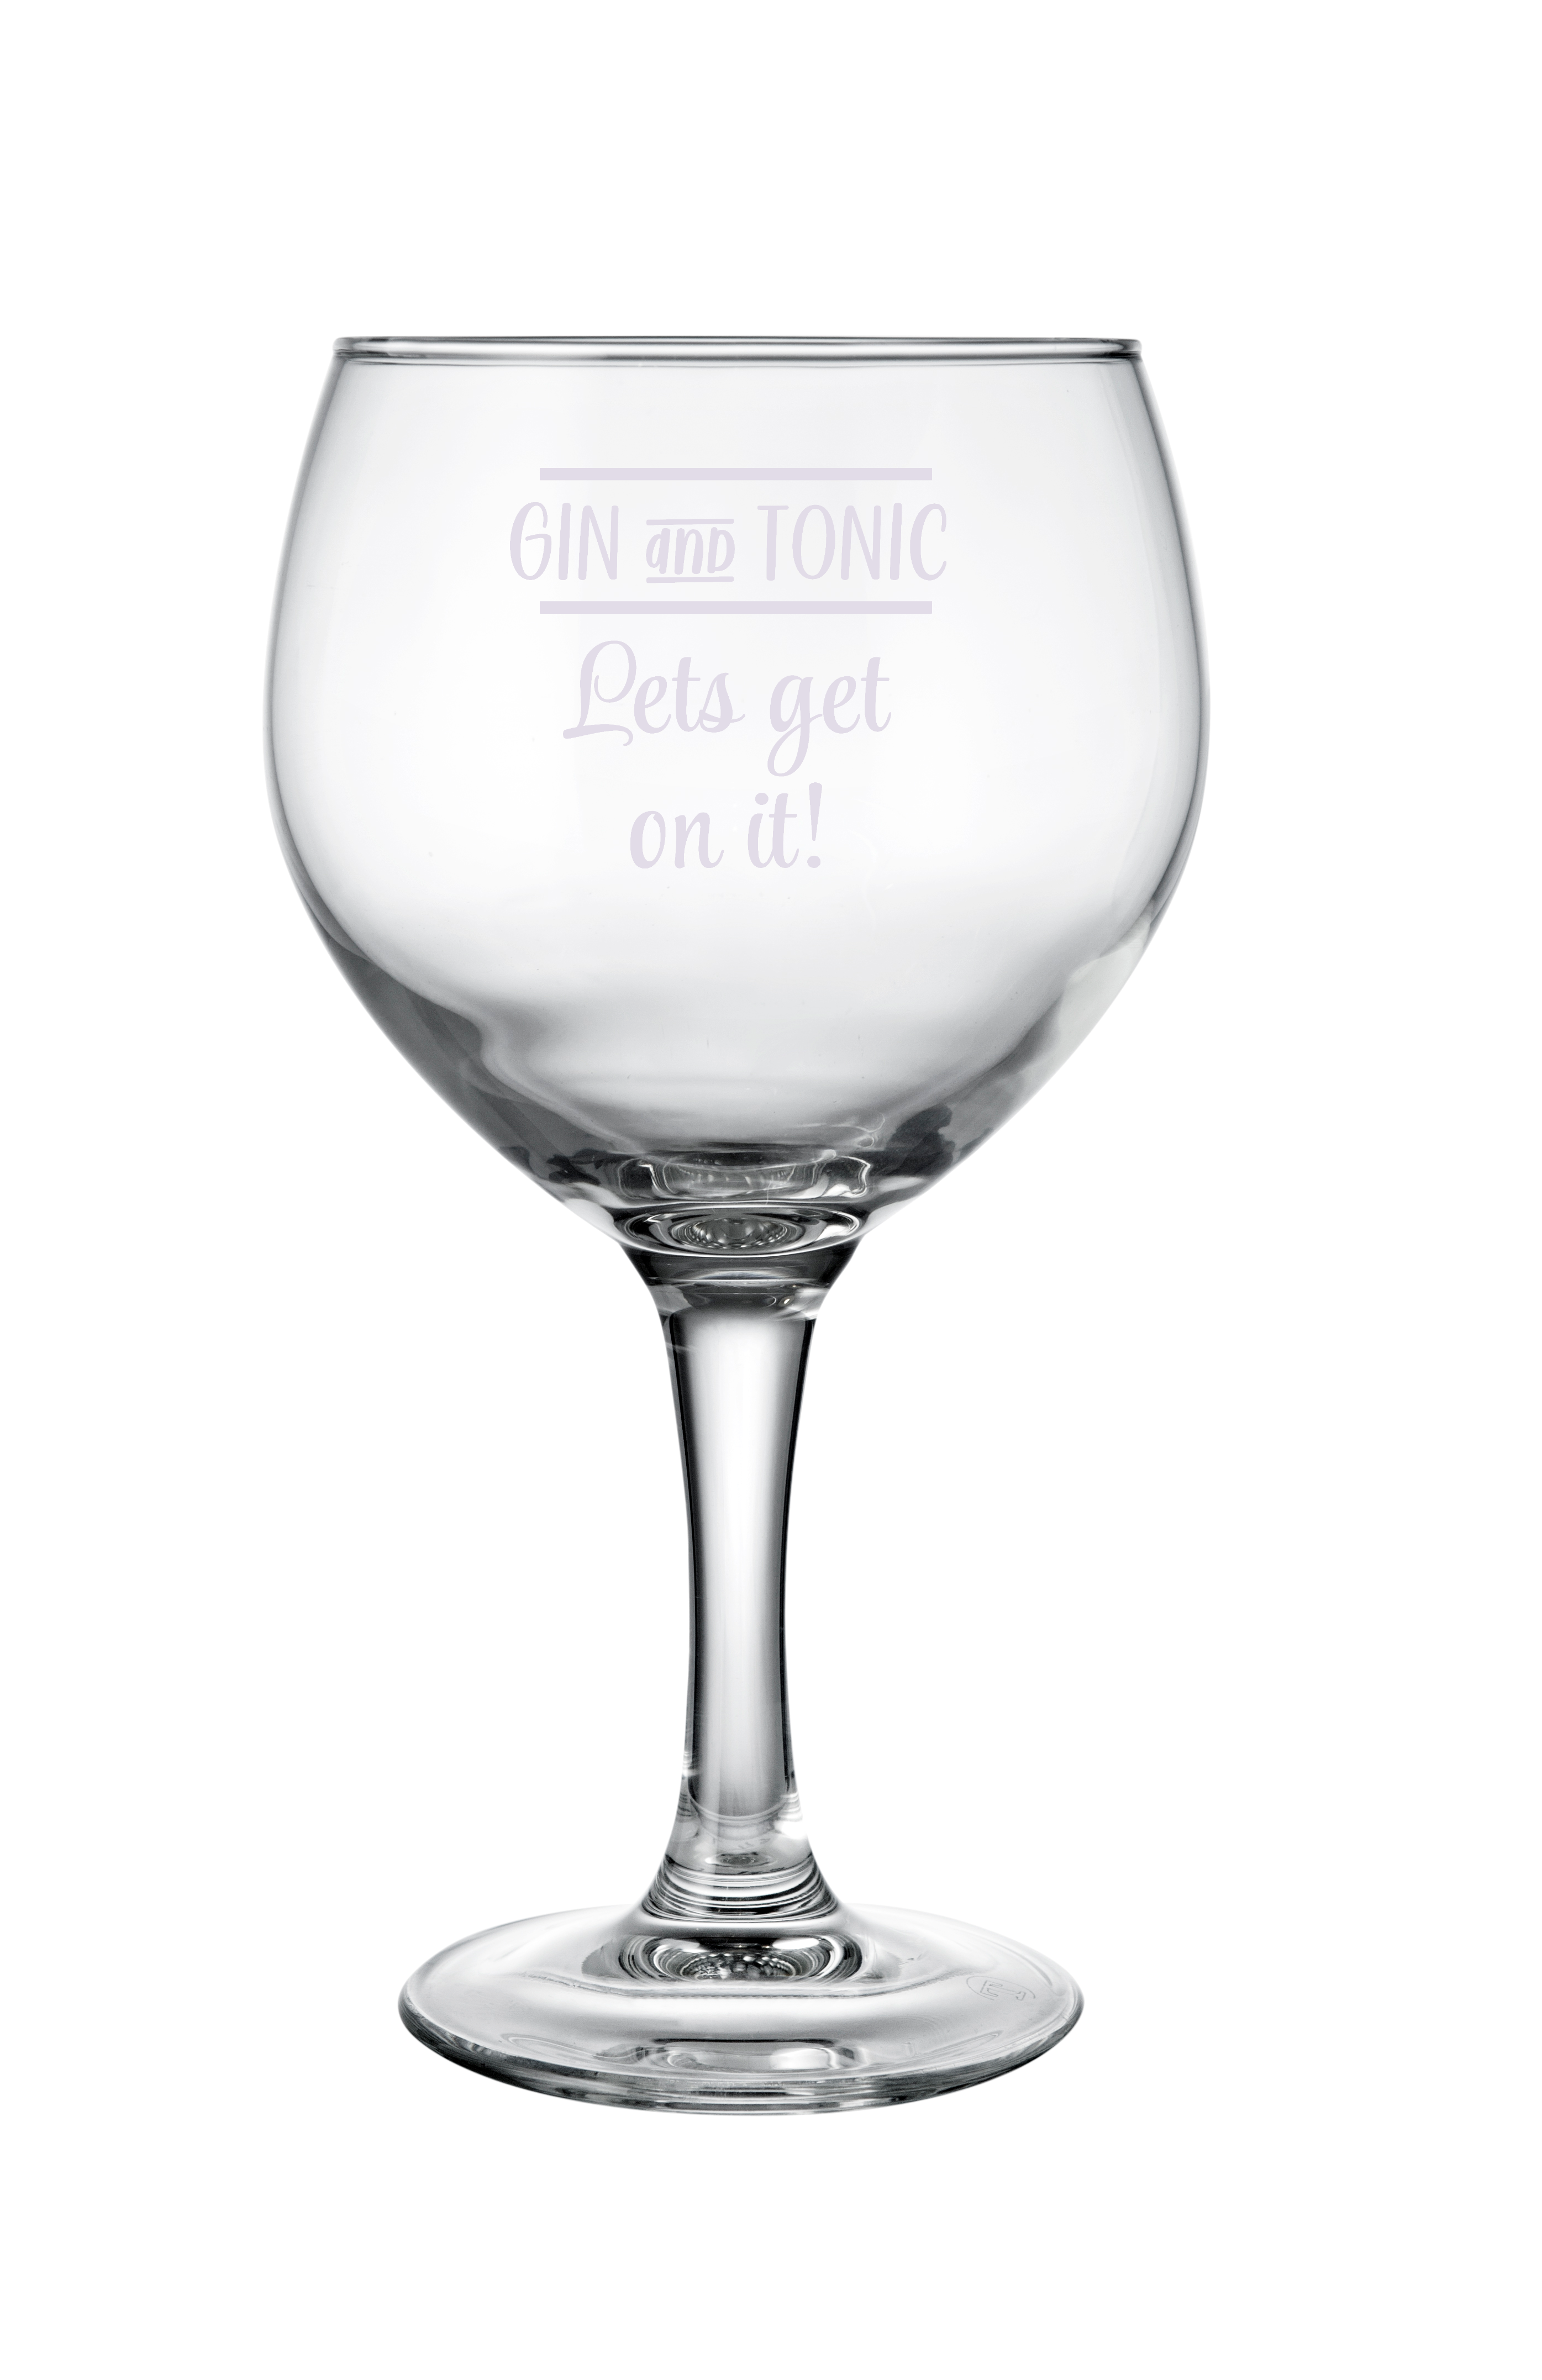 Ginglas - Gin and Tonic - Lets get on it!